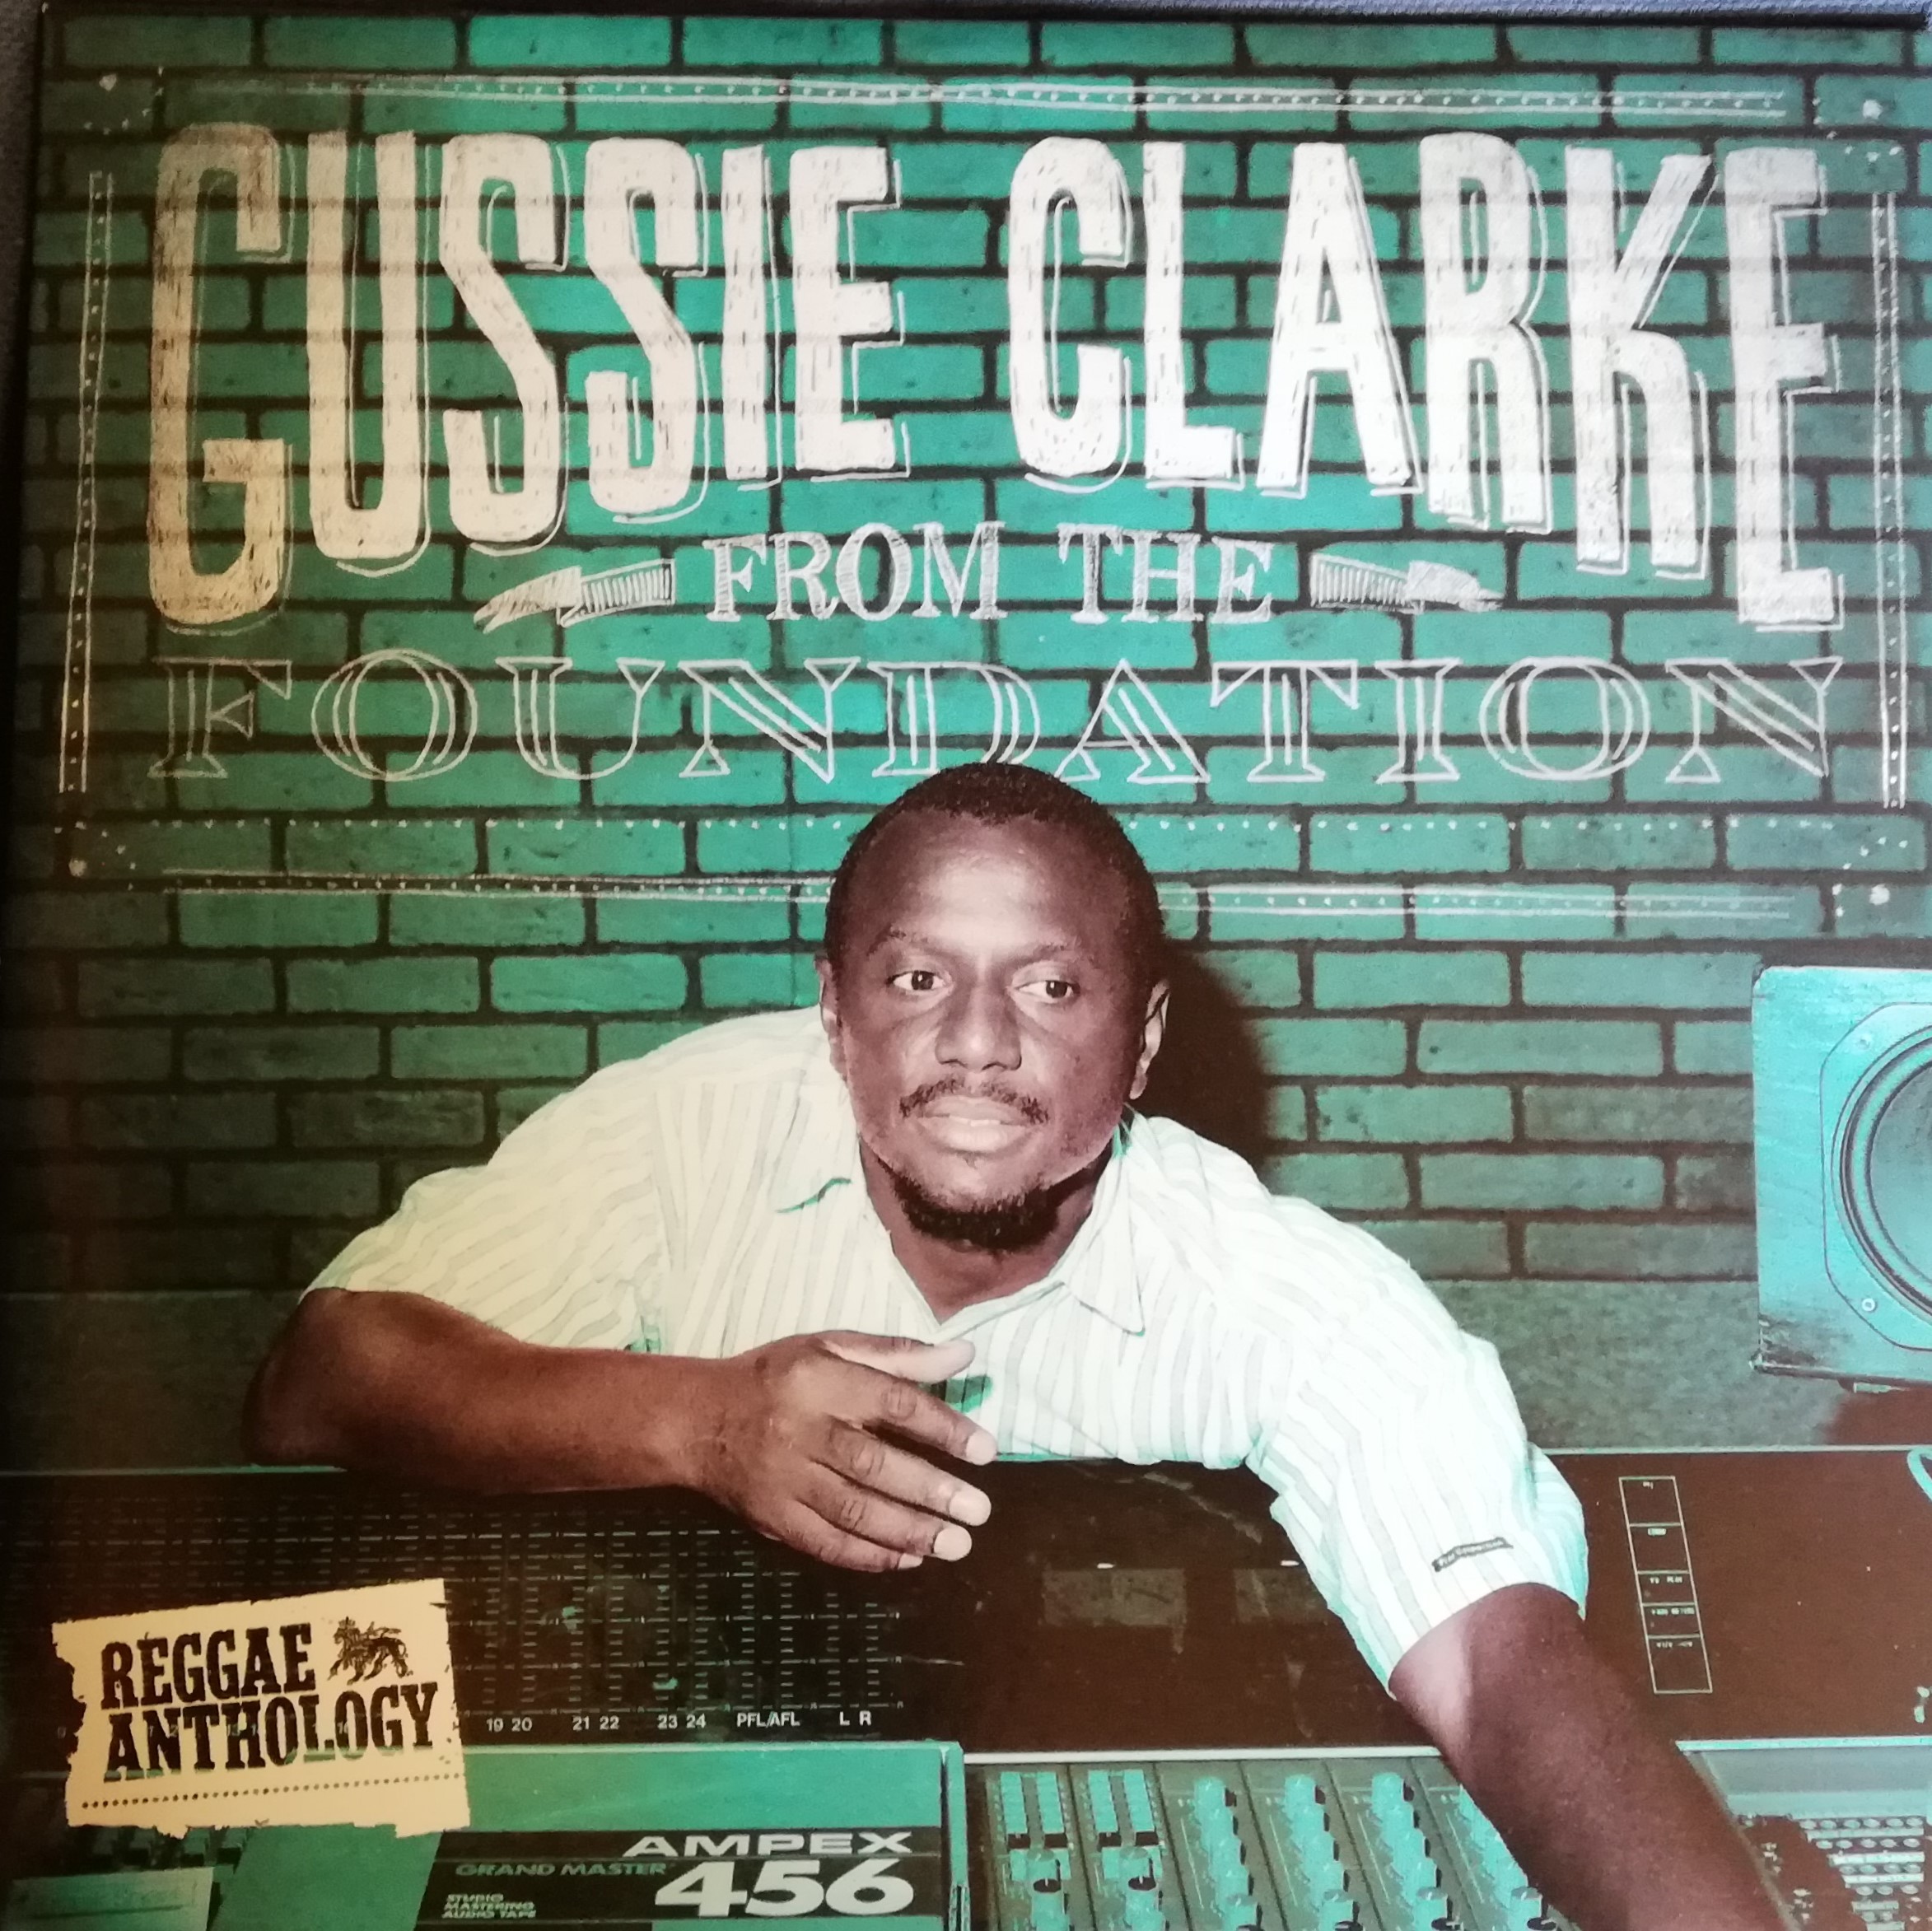 LP - GUSSIE CLARKE - FROM THE FOUNDATION